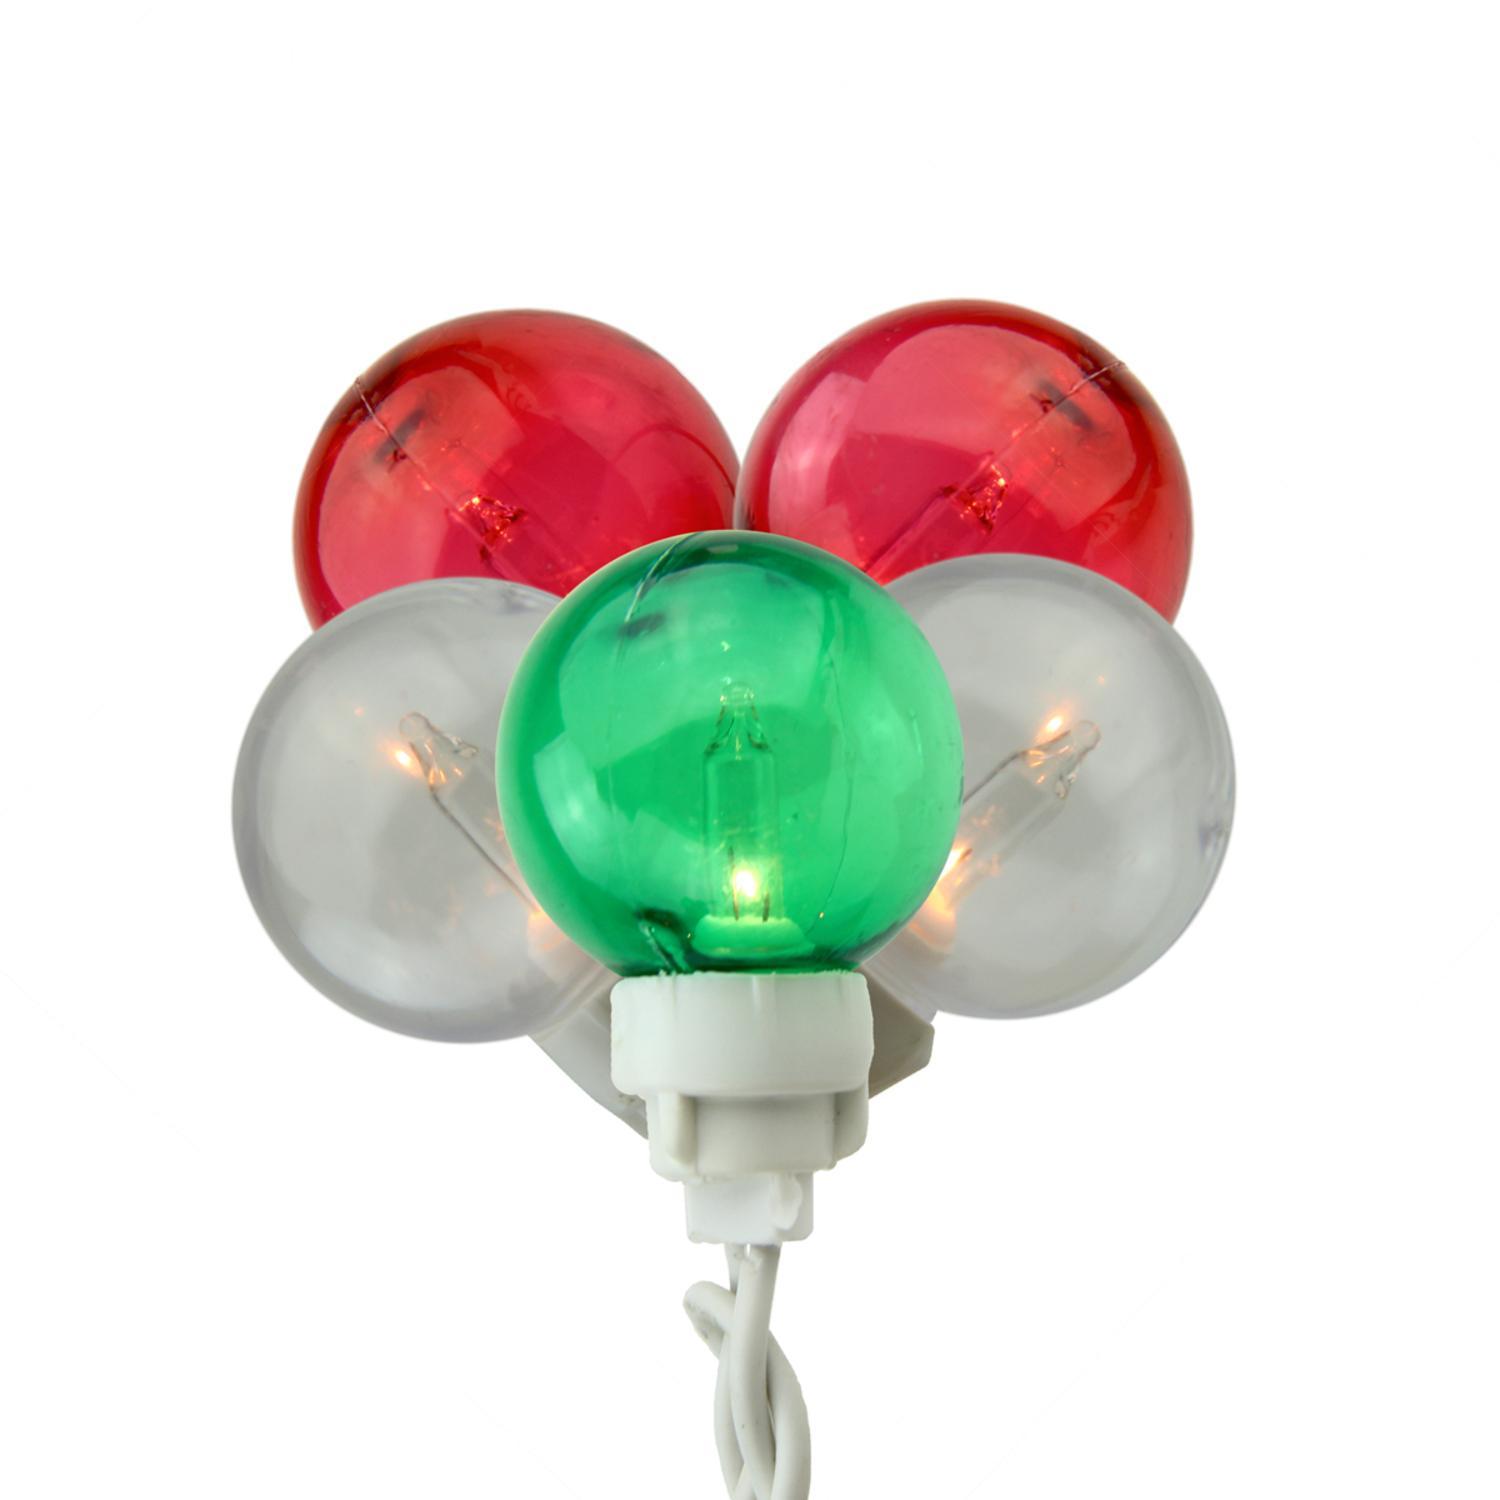 Red White Globe Logo - Set of 100 Green, Red and White G30 Globe Icicle Christmas Lights ...